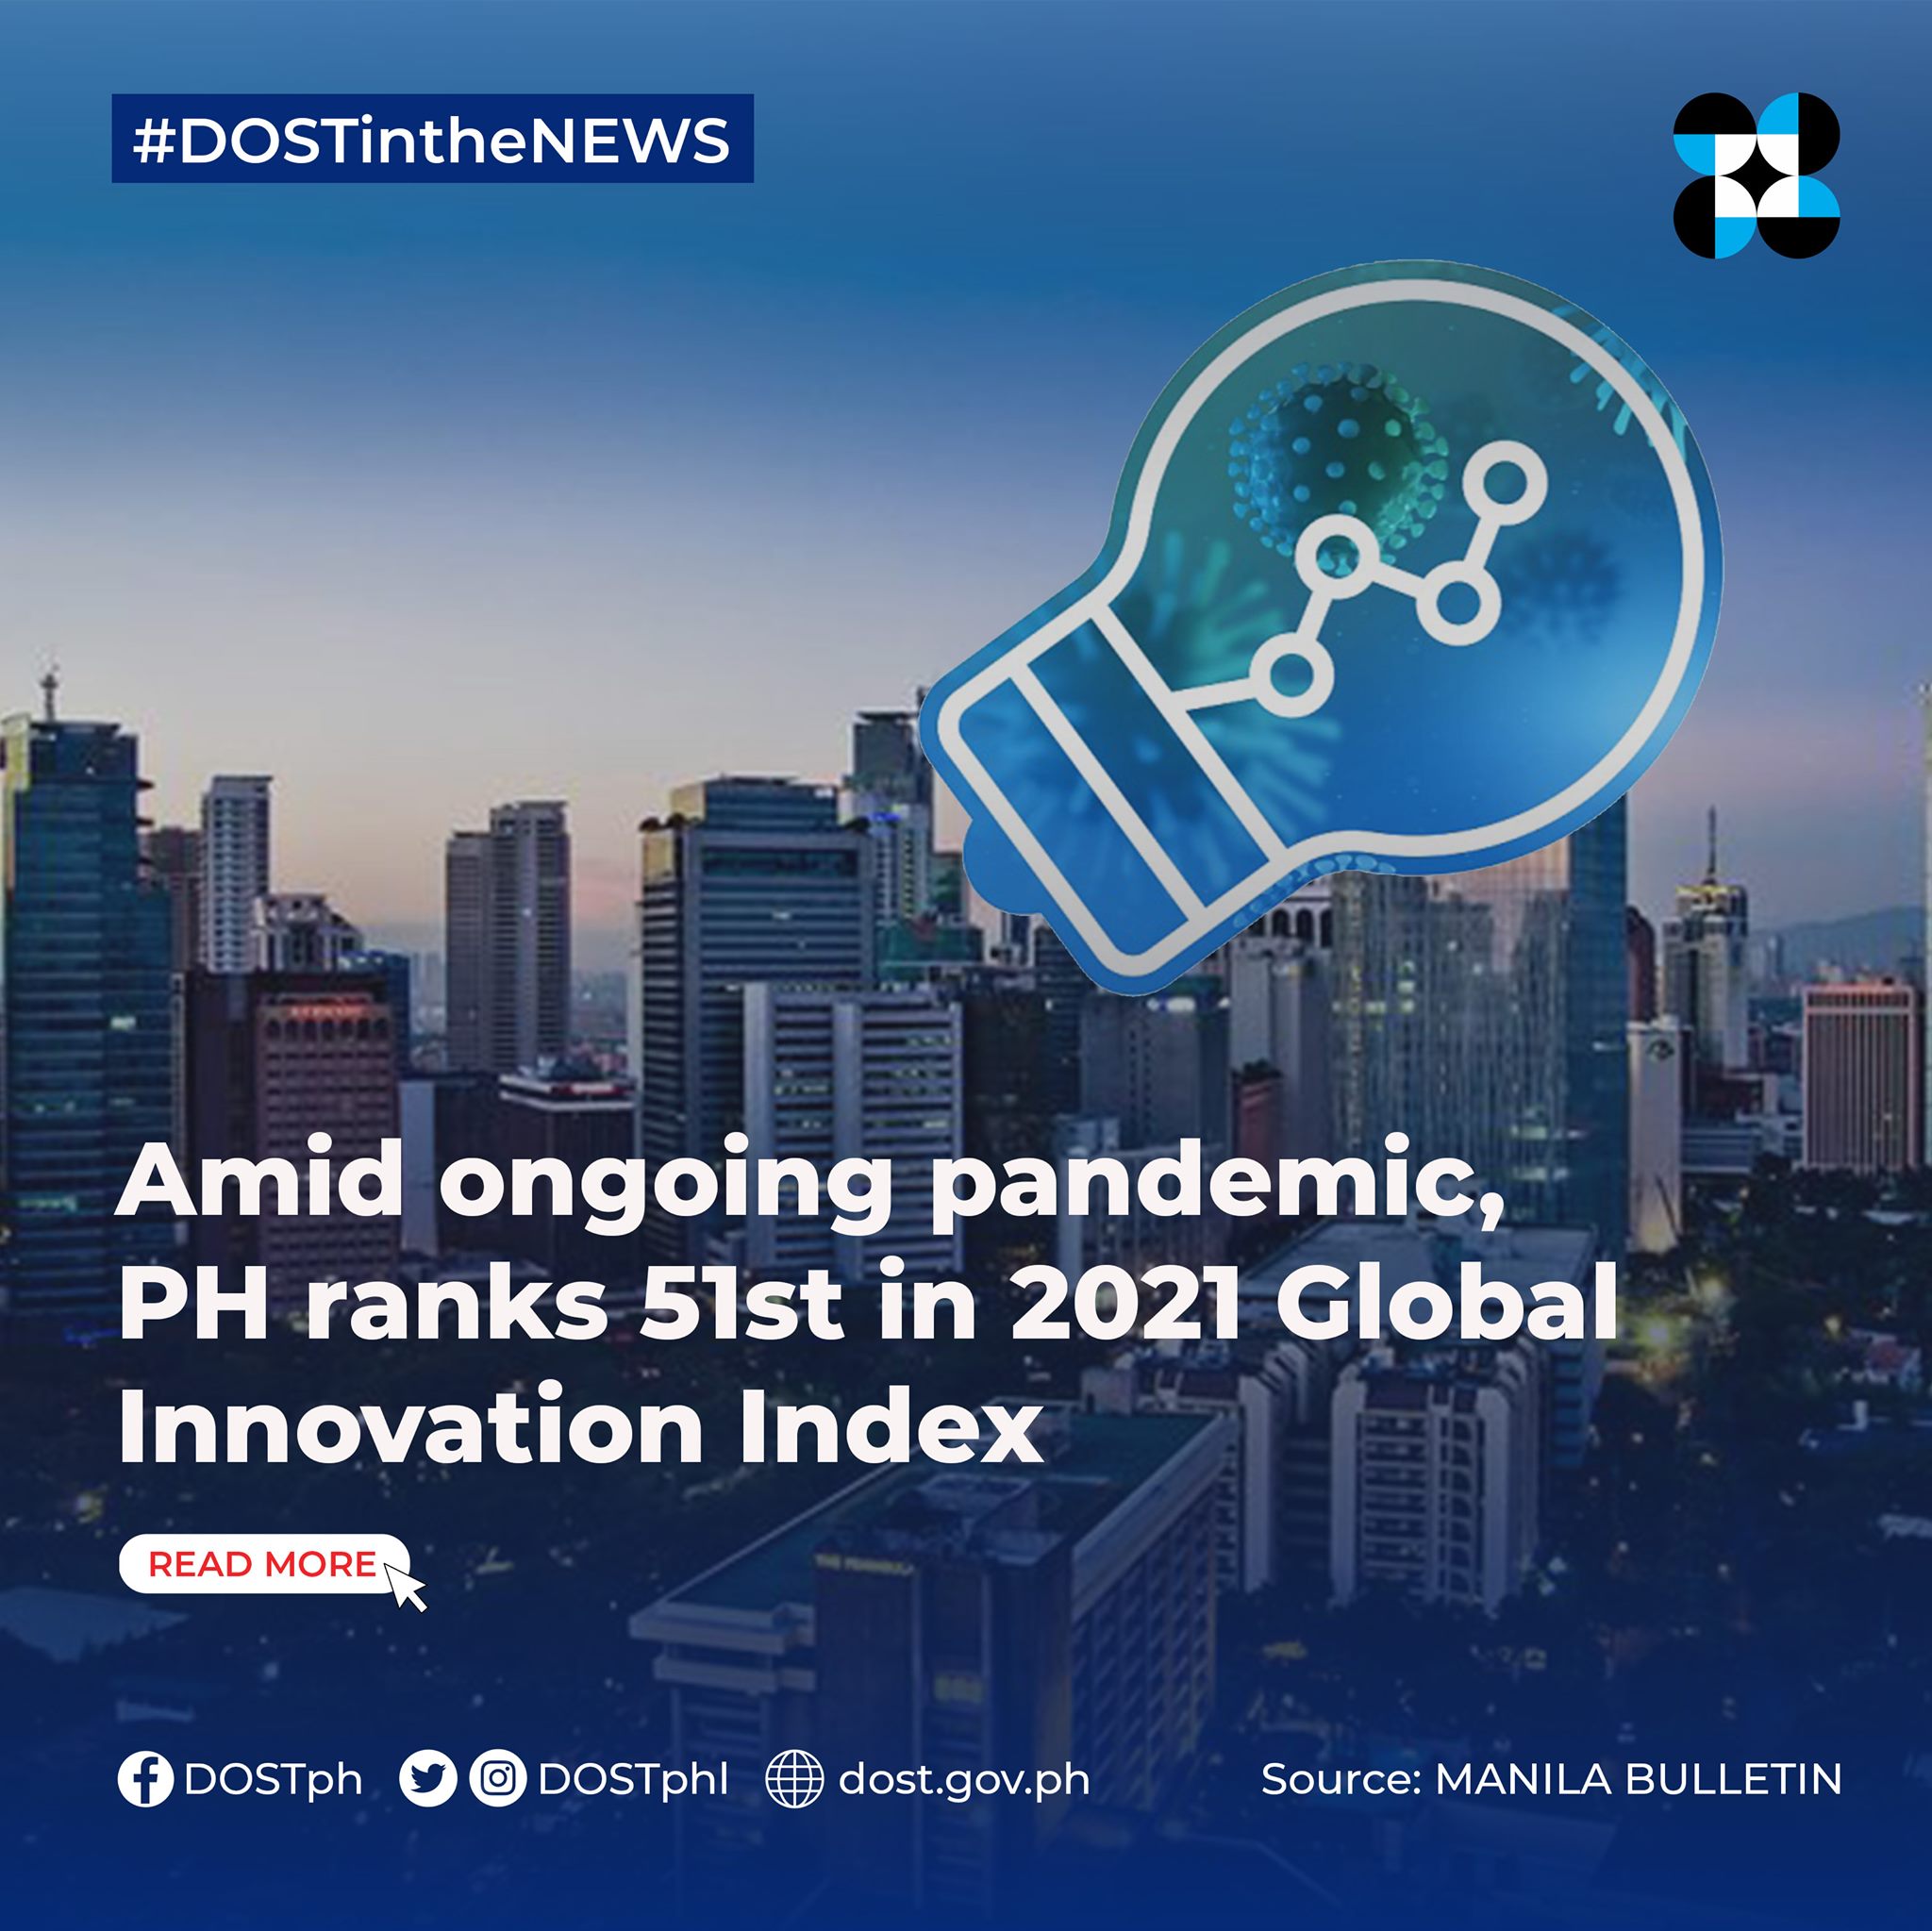 Philippines claims 51st spot in Global Innovation Index 2021 image